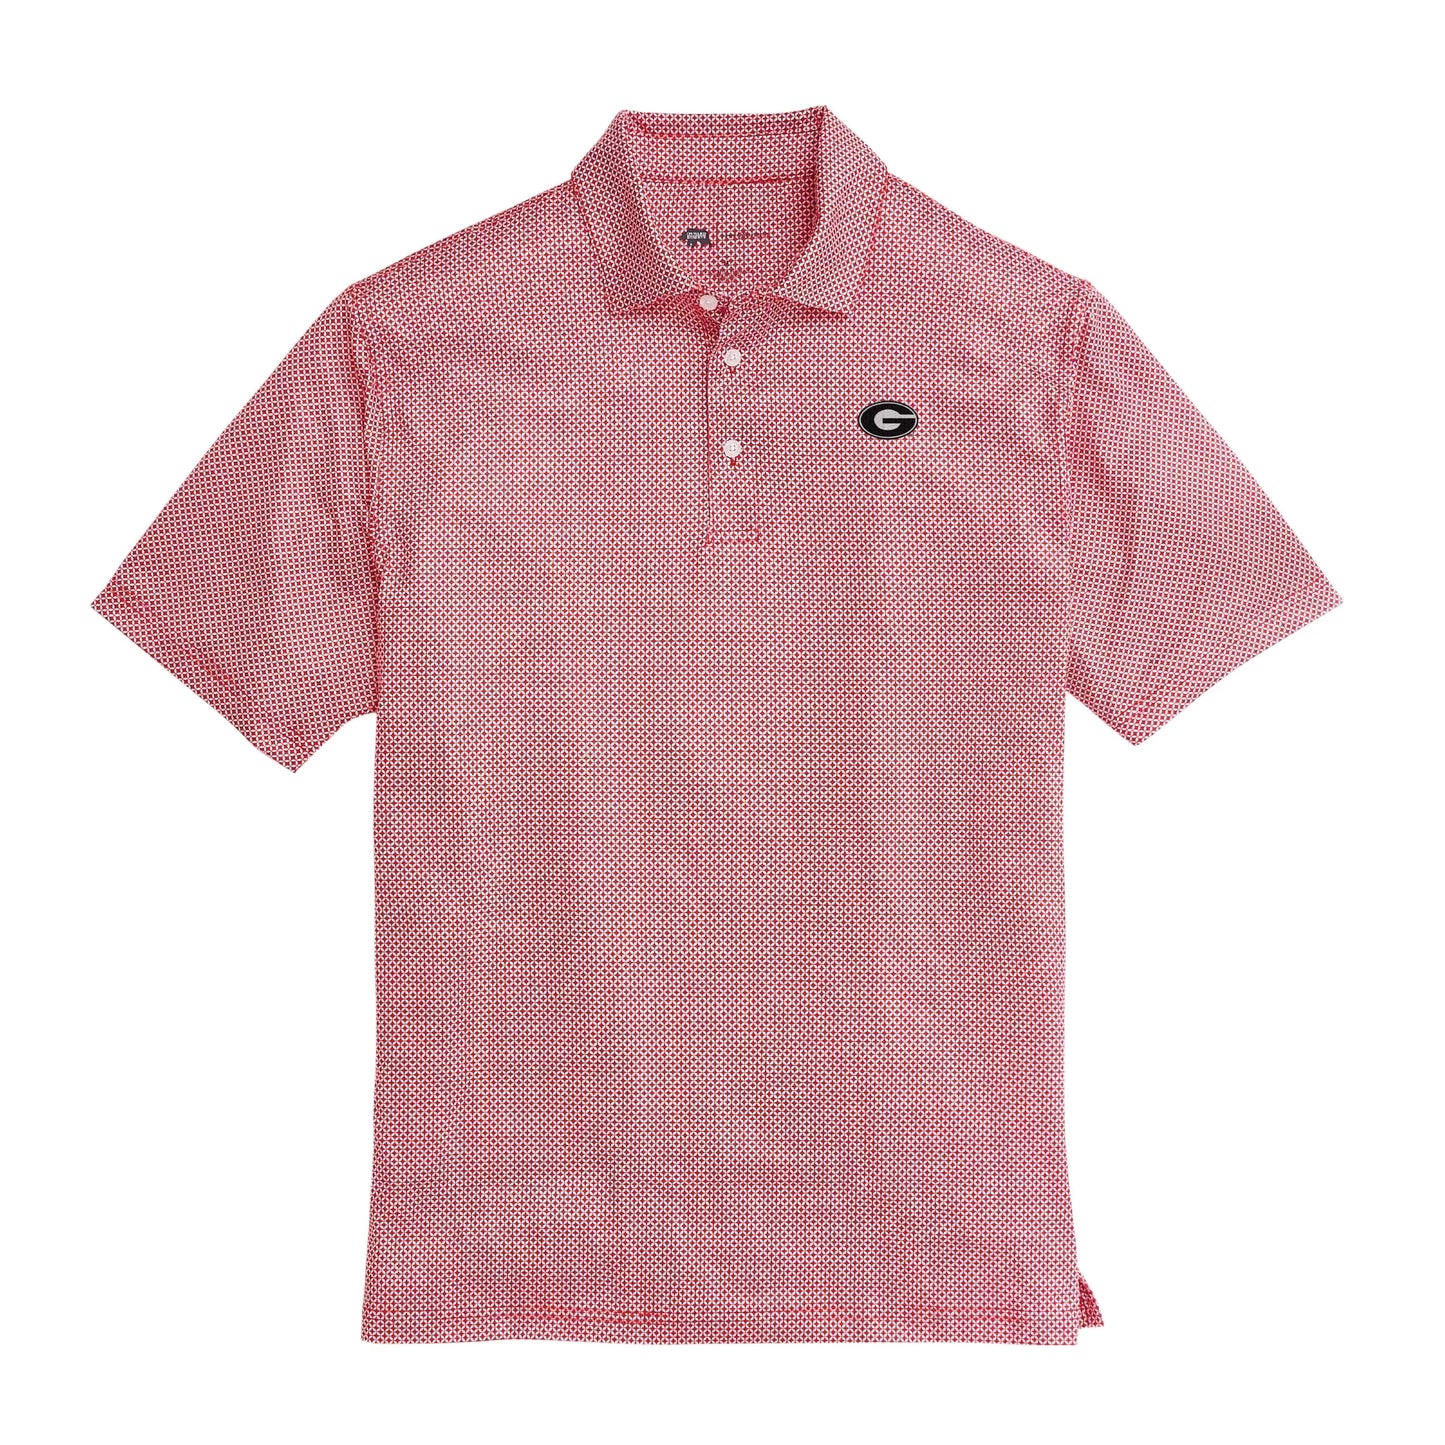 Super G Scope Printed Performance Polo